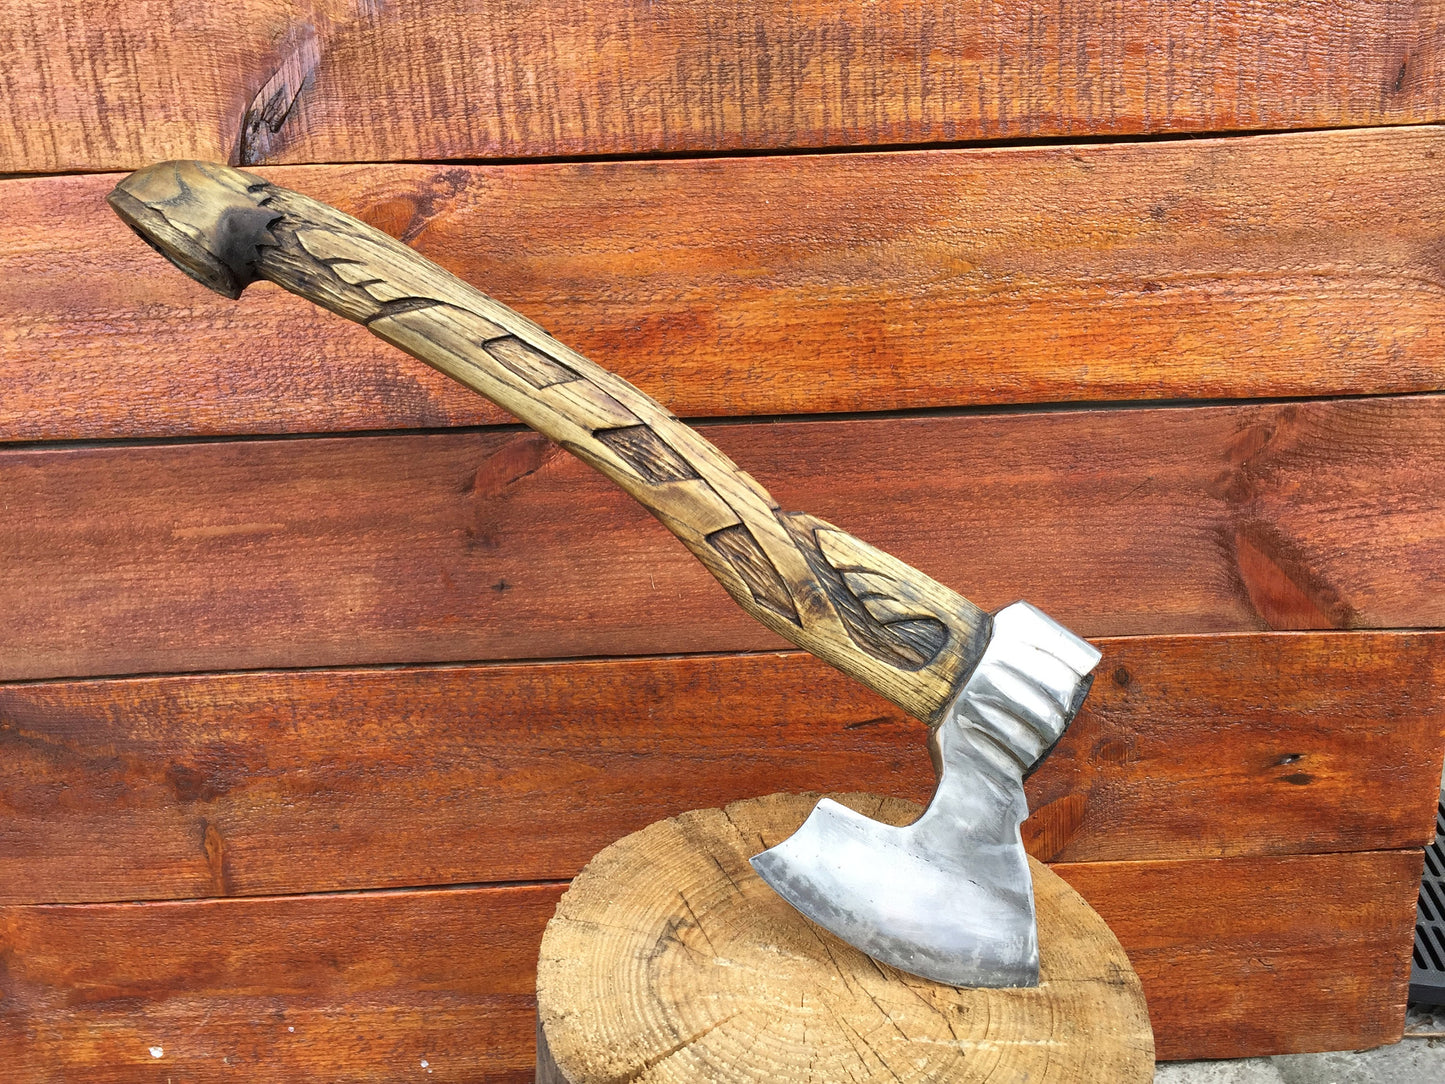 6th anniversary gift, medieval axe, viking axe, iron gift for him, best man gift, birthday gift, hatchet, tools, mens gifts, gifts for men